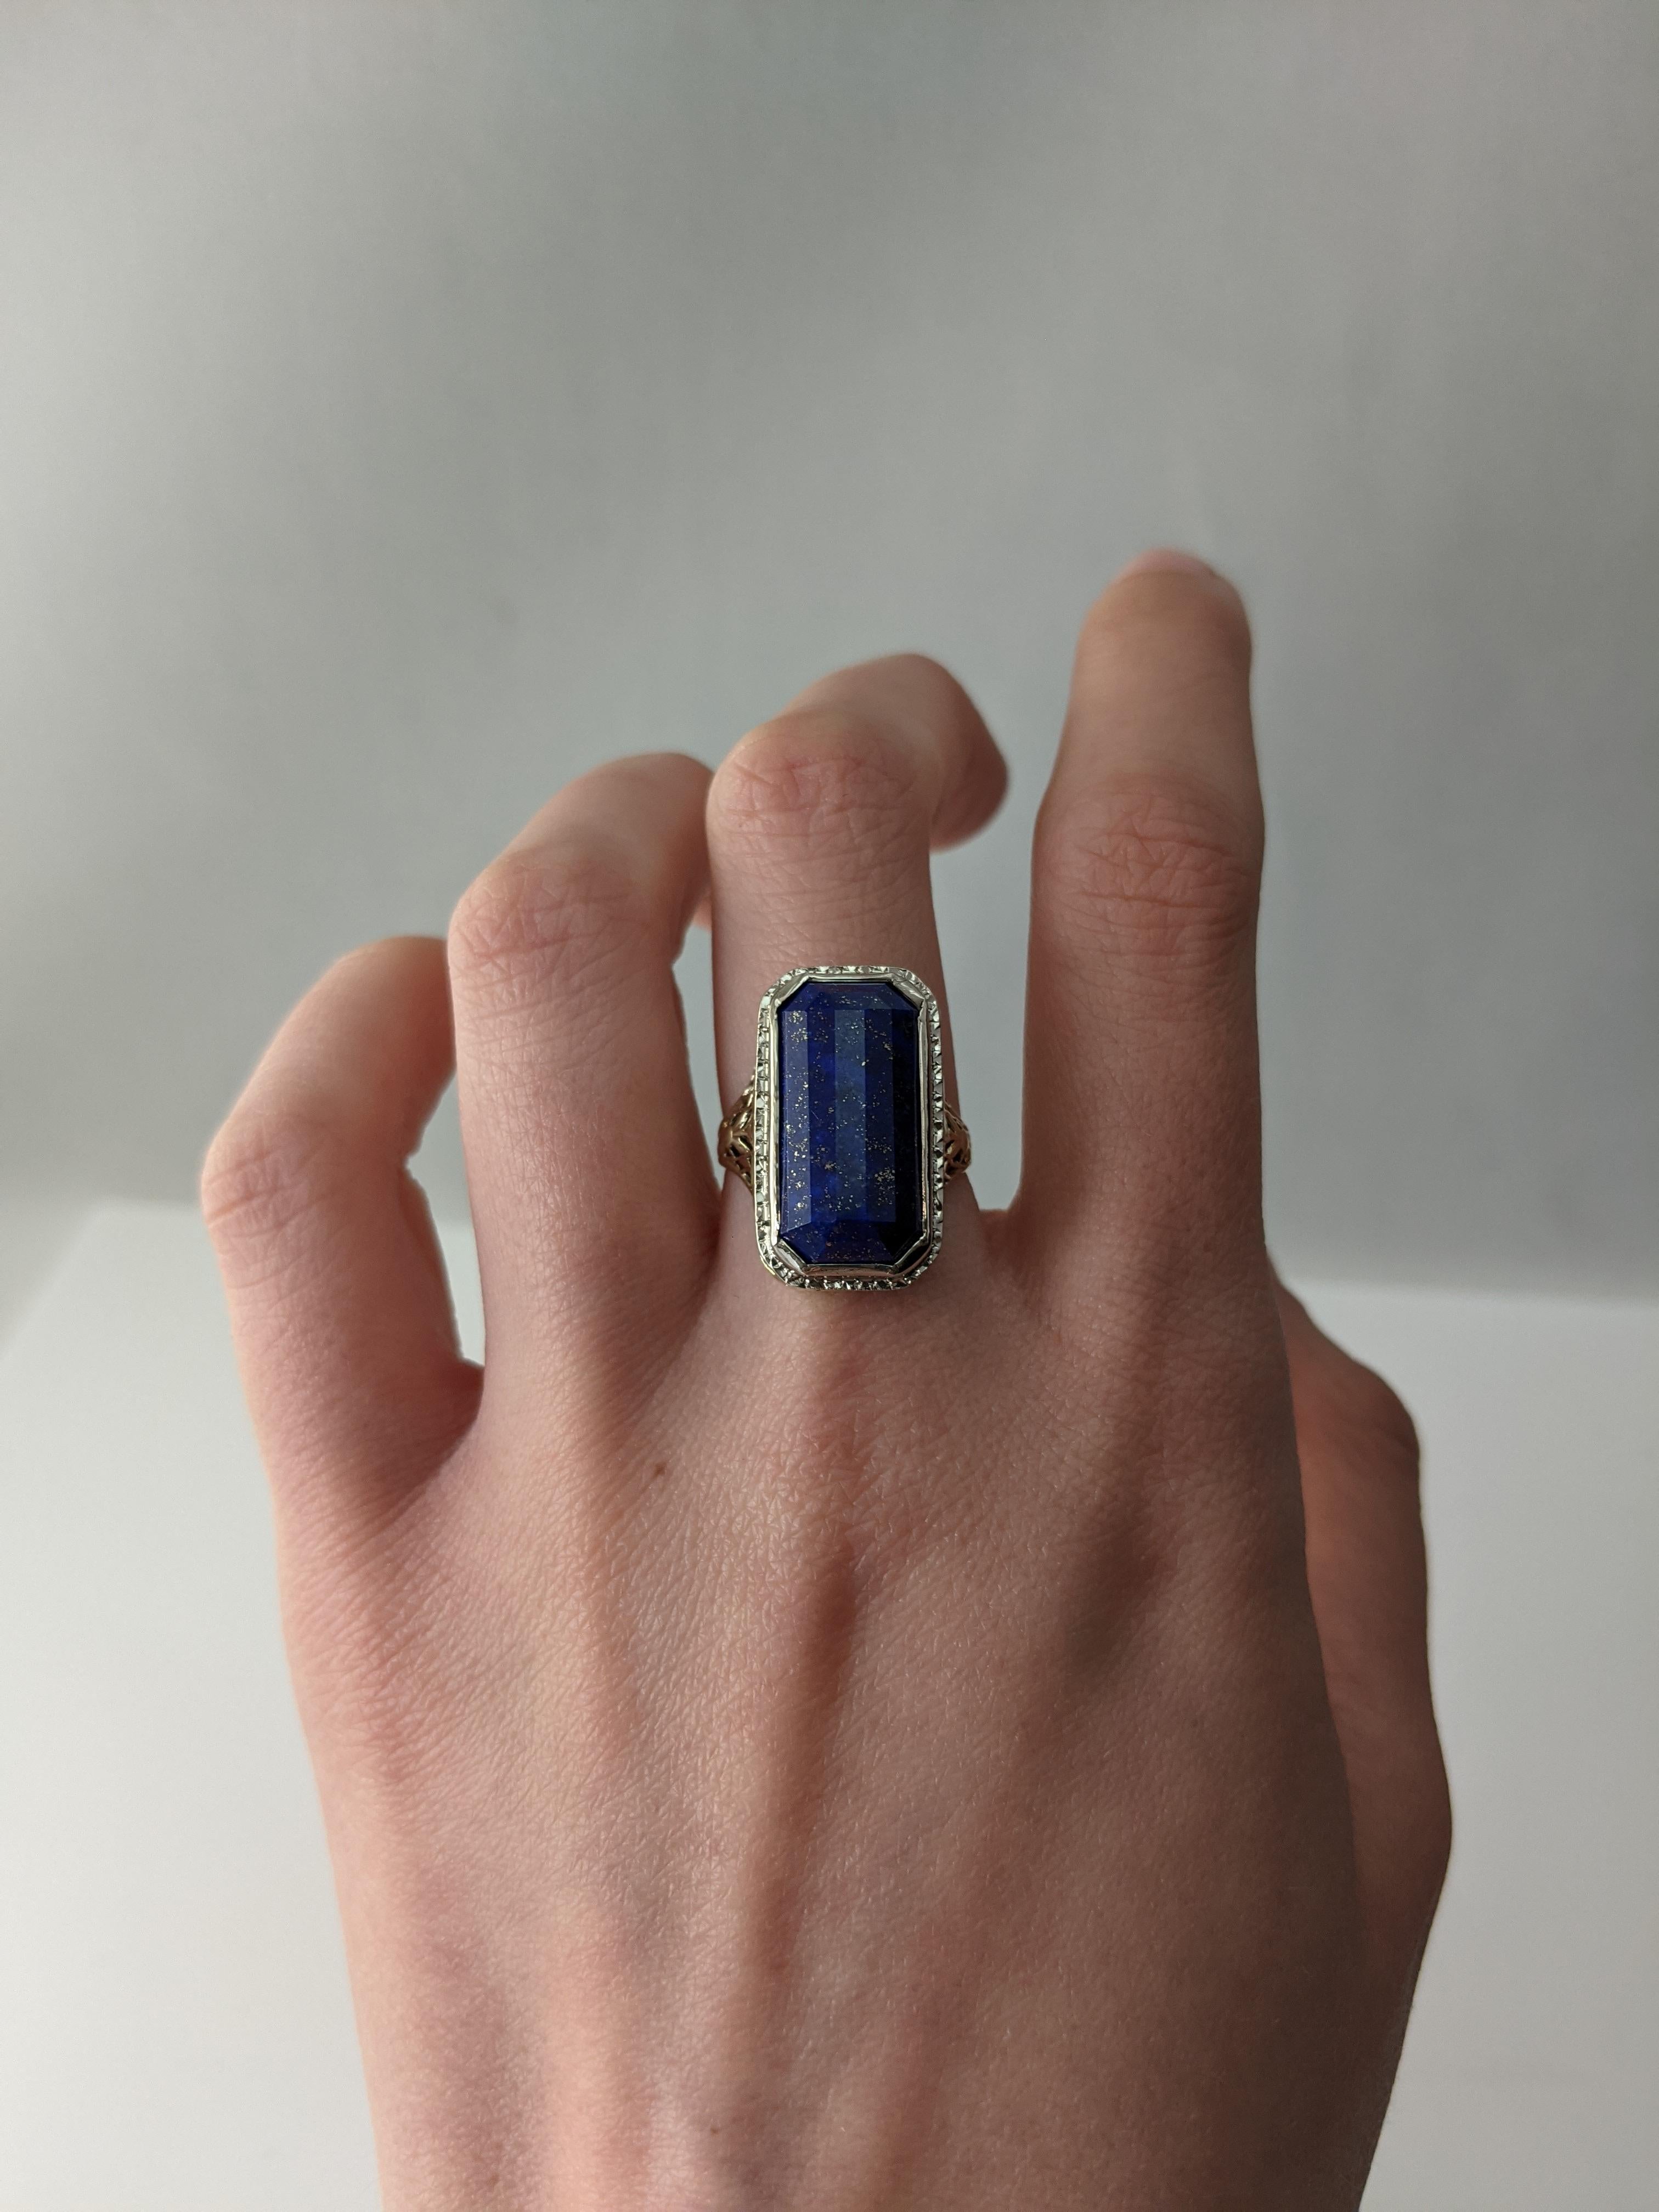 Edwardian 14K White and Green Gold Filigree Faceted Blue Lapis Statement Ring 4